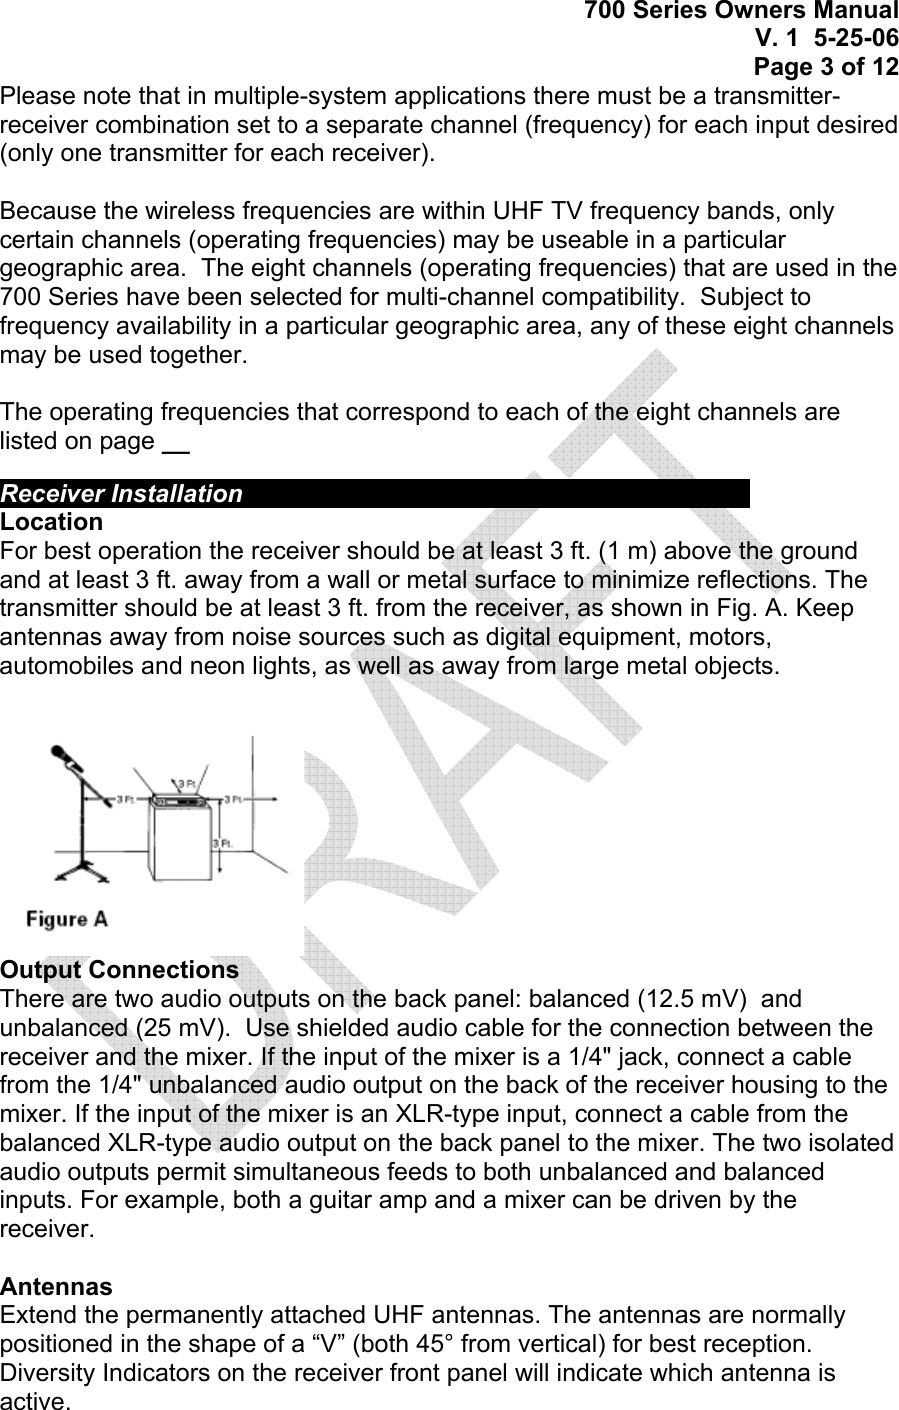  700 Series Owners Manual V. 1  5-25-06 Page 3 of 12 Please note that in multiple-system applications there must be a transmitter-receiver combination set to a separate channel (frequency) for each input desired (only one transmitter for each receiver).  Because the wireless frequencies are within UHF TV frequency bands, only certain channels (operating frequencies) may be useable in a particular geographic area.  The eight channels (operating frequencies) that are used in the 700 Series have been selected for multi-channel compatibility.  Subject to frequency availability in a particular geographic area, any of these eight channels may be used together.    The operating frequencies that correspond to each of the eight channels are listed on page __   Receiver Installation           Location For best operation the receiver should be at least 3 ft. (1 m) above the ground and at least 3 ft. away from a wall or metal surface to minimize reflections. The transmitter should be at least 3 ft. from the receiver, as shown in Fig. A. Keep antennas away from noise sources such as digital equipment, motors, automobiles and neon lights, as well as away from large metal objects.  Output Connections There are two audio outputs on the back panel: balanced (12.5 mV)  and unbalanced (25 mV).  Use shielded audio cable for the connection between the receiver and the mixer. If the input of the mixer is a 1/4&quot; jack, connect a cable from the 1/4&quot; unbalanced audio output on the back of the receiver housing to the mixer. If the input of the mixer is an XLR-type input, connect a cable from the balanced XLR-type audio output on the back panel to the mixer. The two isolated audio outputs permit simultaneous feeds to both unbalanced and balanced inputs. For example, both a guitar amp and a mixer can be driven by the receiver.  Antennas Extend the permanently attached UHF antennas. The antennas are normally positioned in the shape of a “V” (both 45° from vertical) for best reception.  Diversity Indicators on the receiver front panel will indicate which antenna is active. 